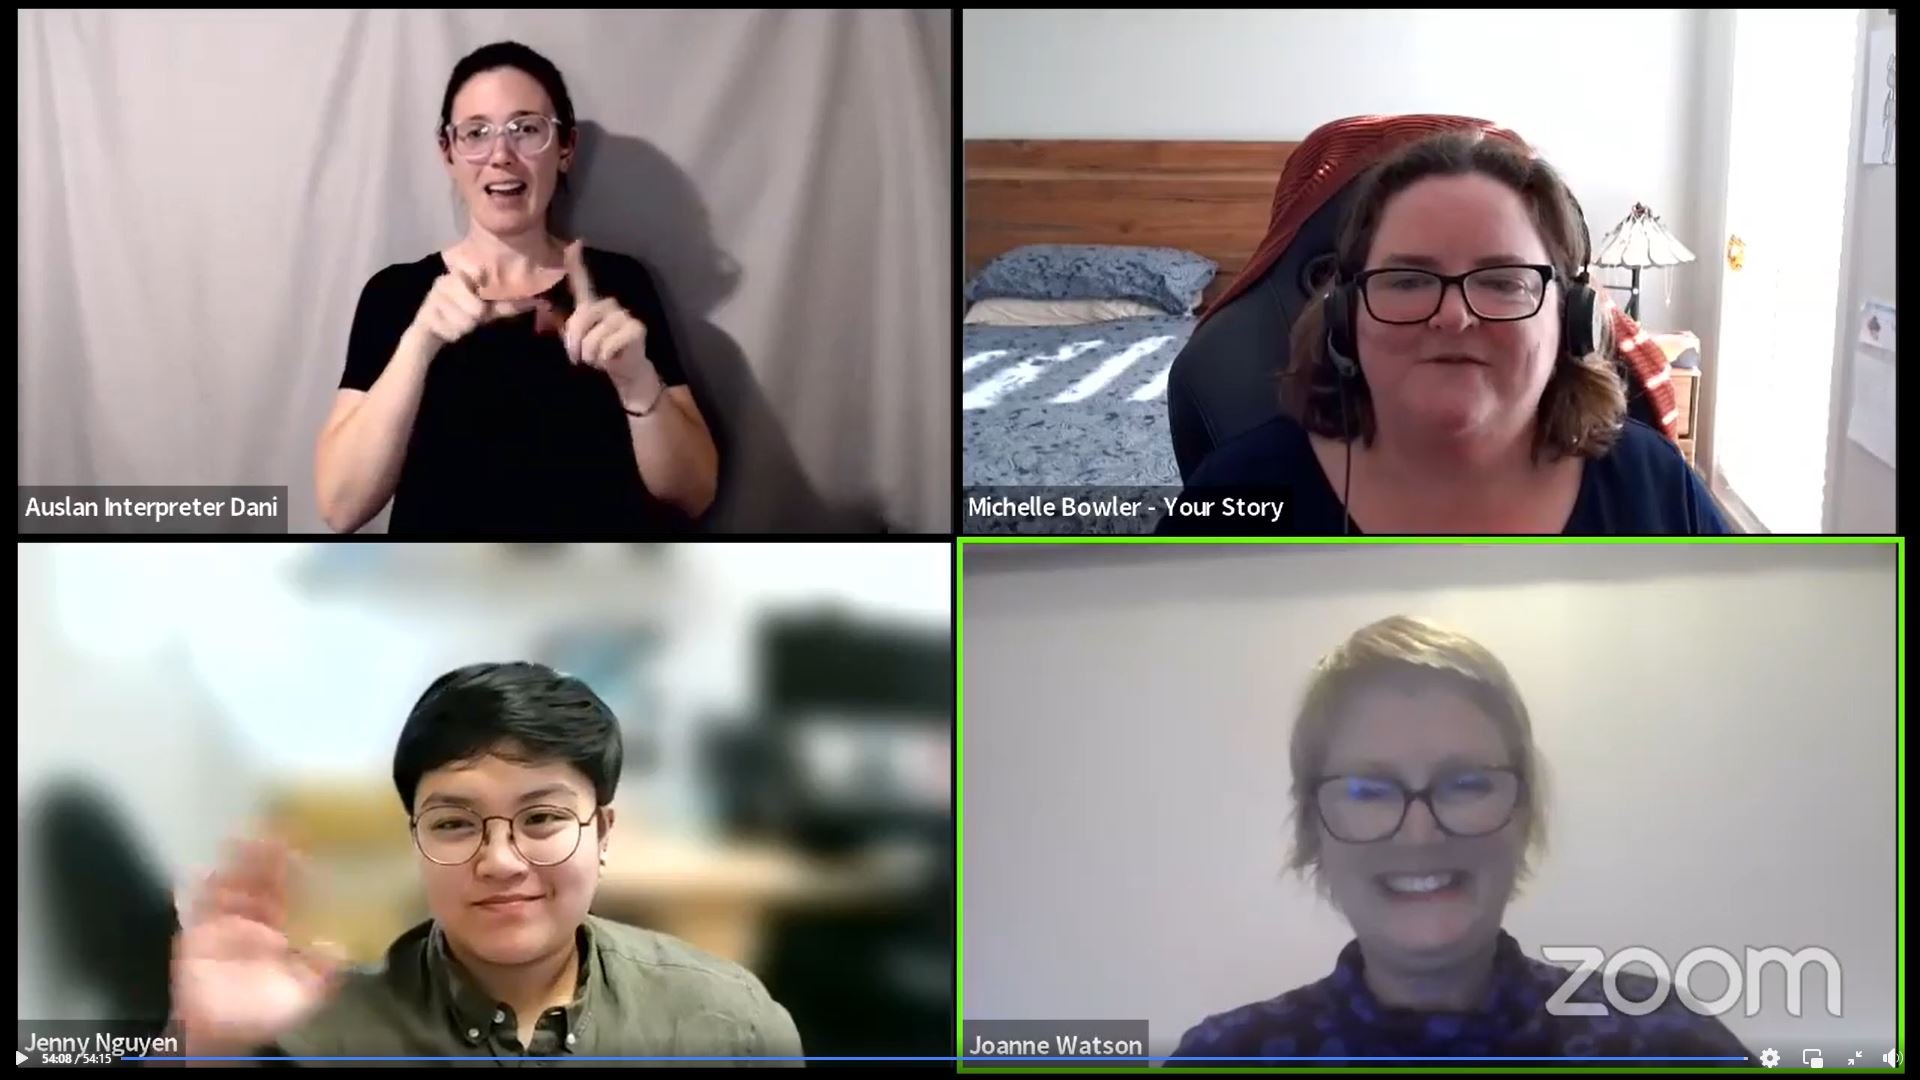 A screenshot from the carers webinar showing three smiling people and an Auslan interpreter